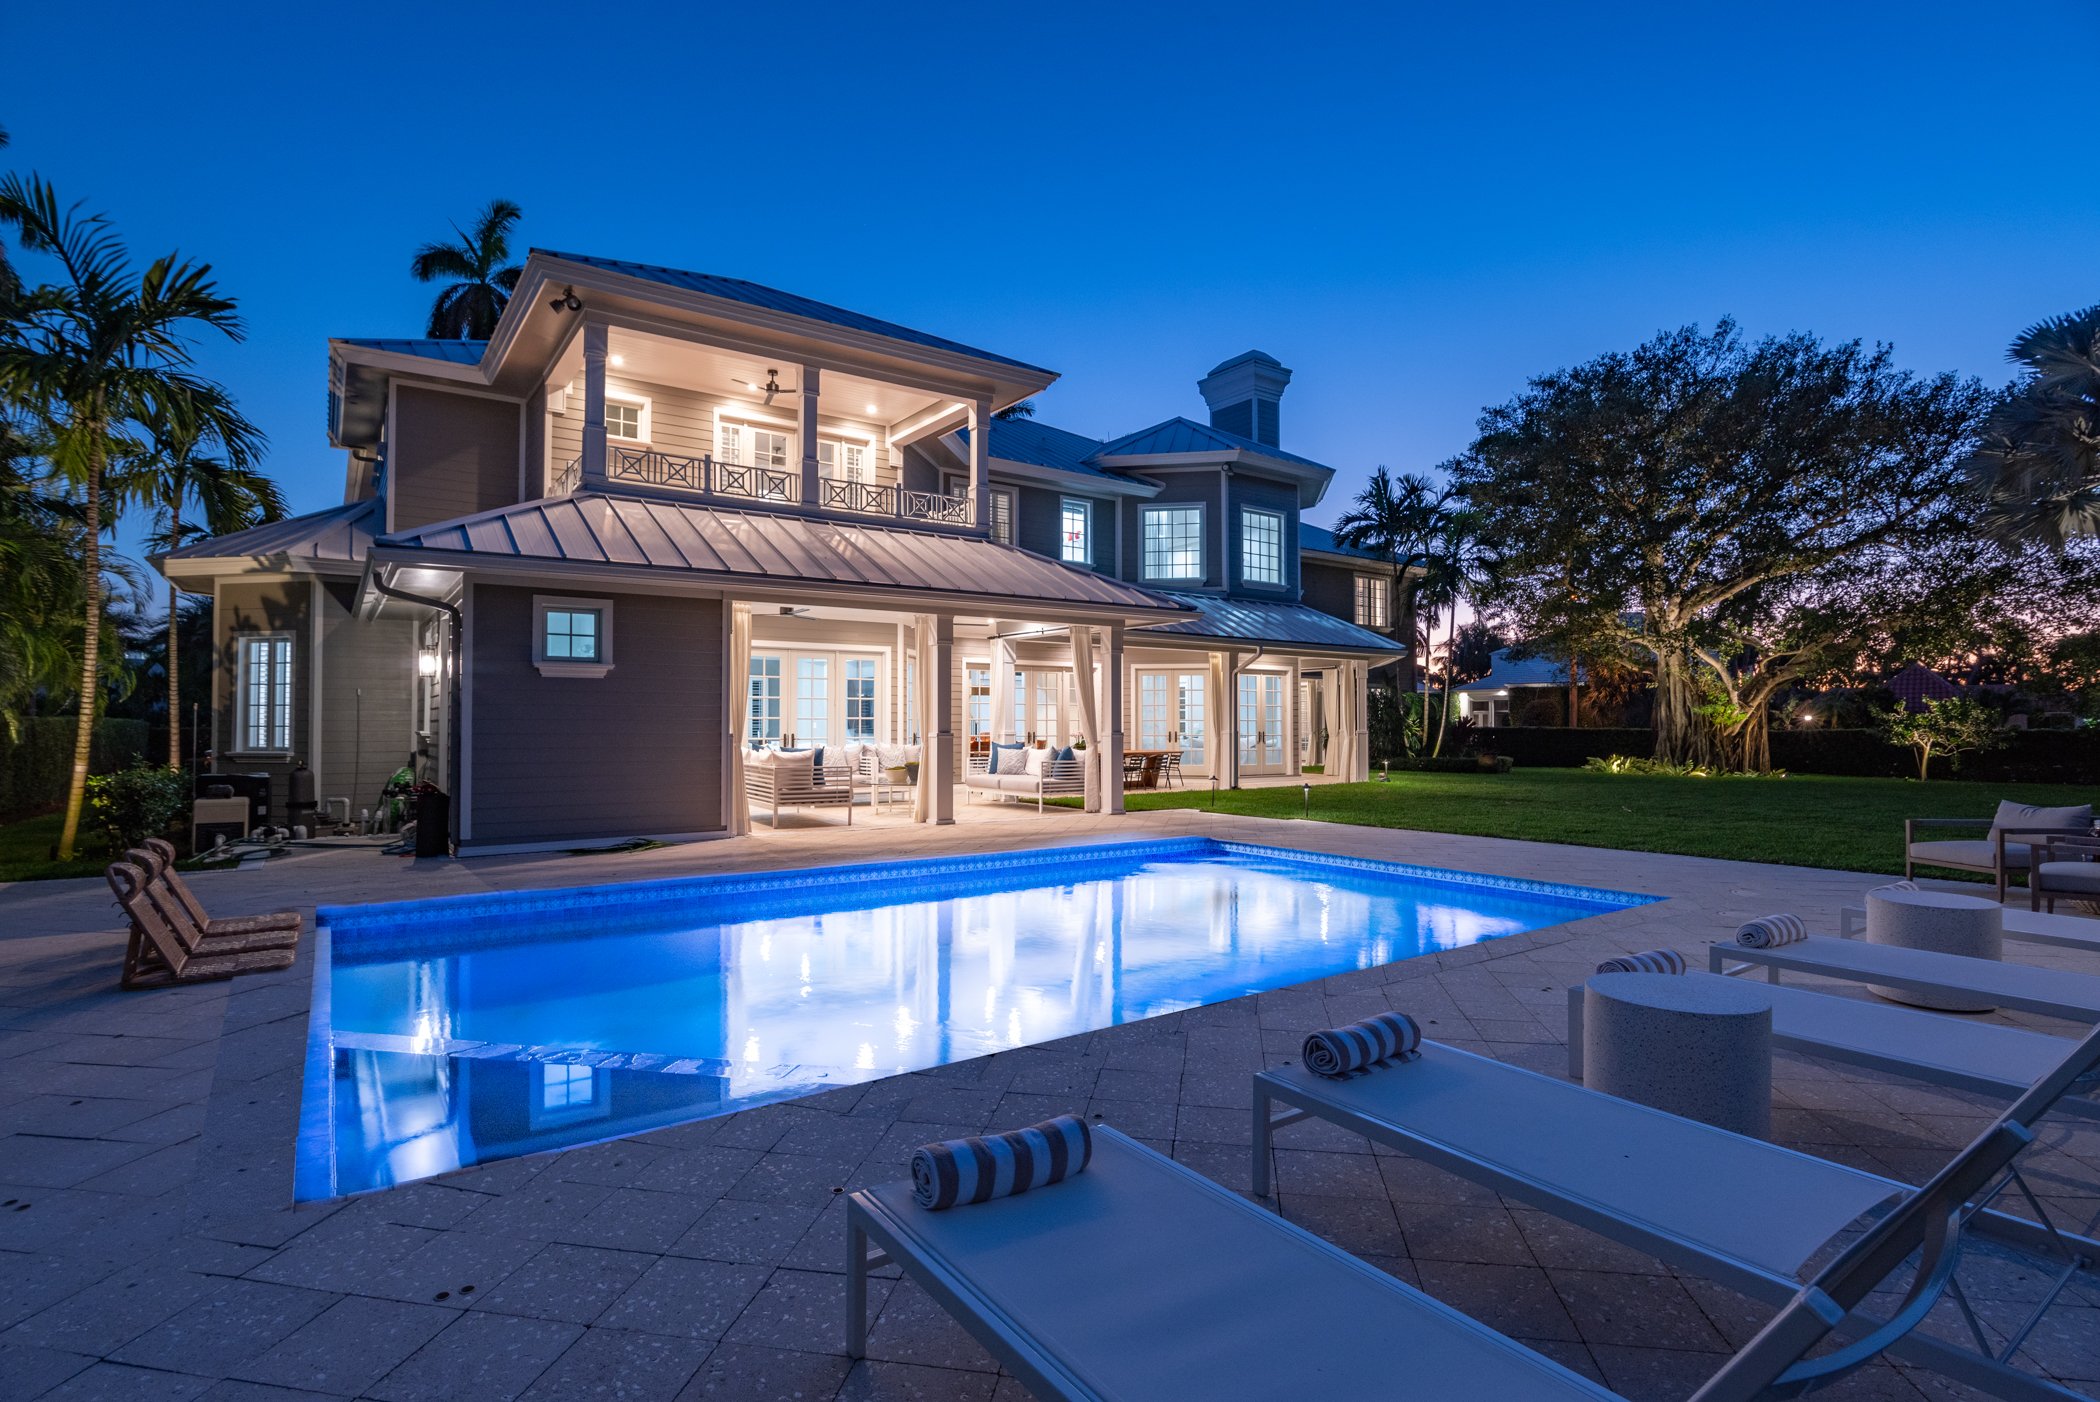 Check Out This Newly Renovated Coastal Contemporary In The Exclusive Point Manalapan Which Just Listed For $7.995 Million41.jpg